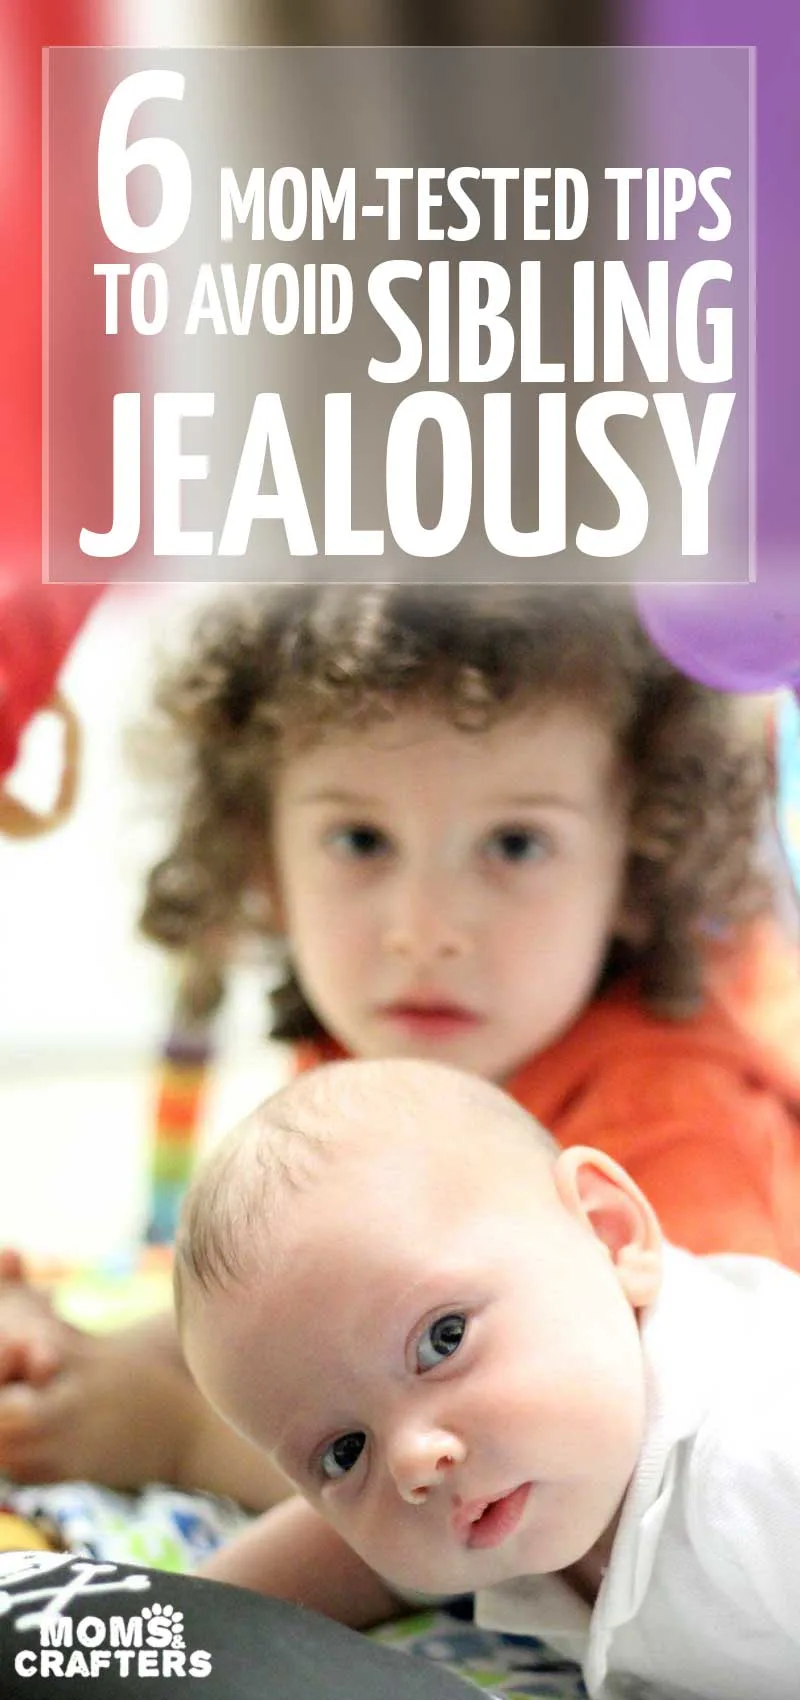 These super helpful tips are perfect ways to avoid sibling jealousy in toddlers when a new baby is born! #pregnancy #parenting #momsandcrafters